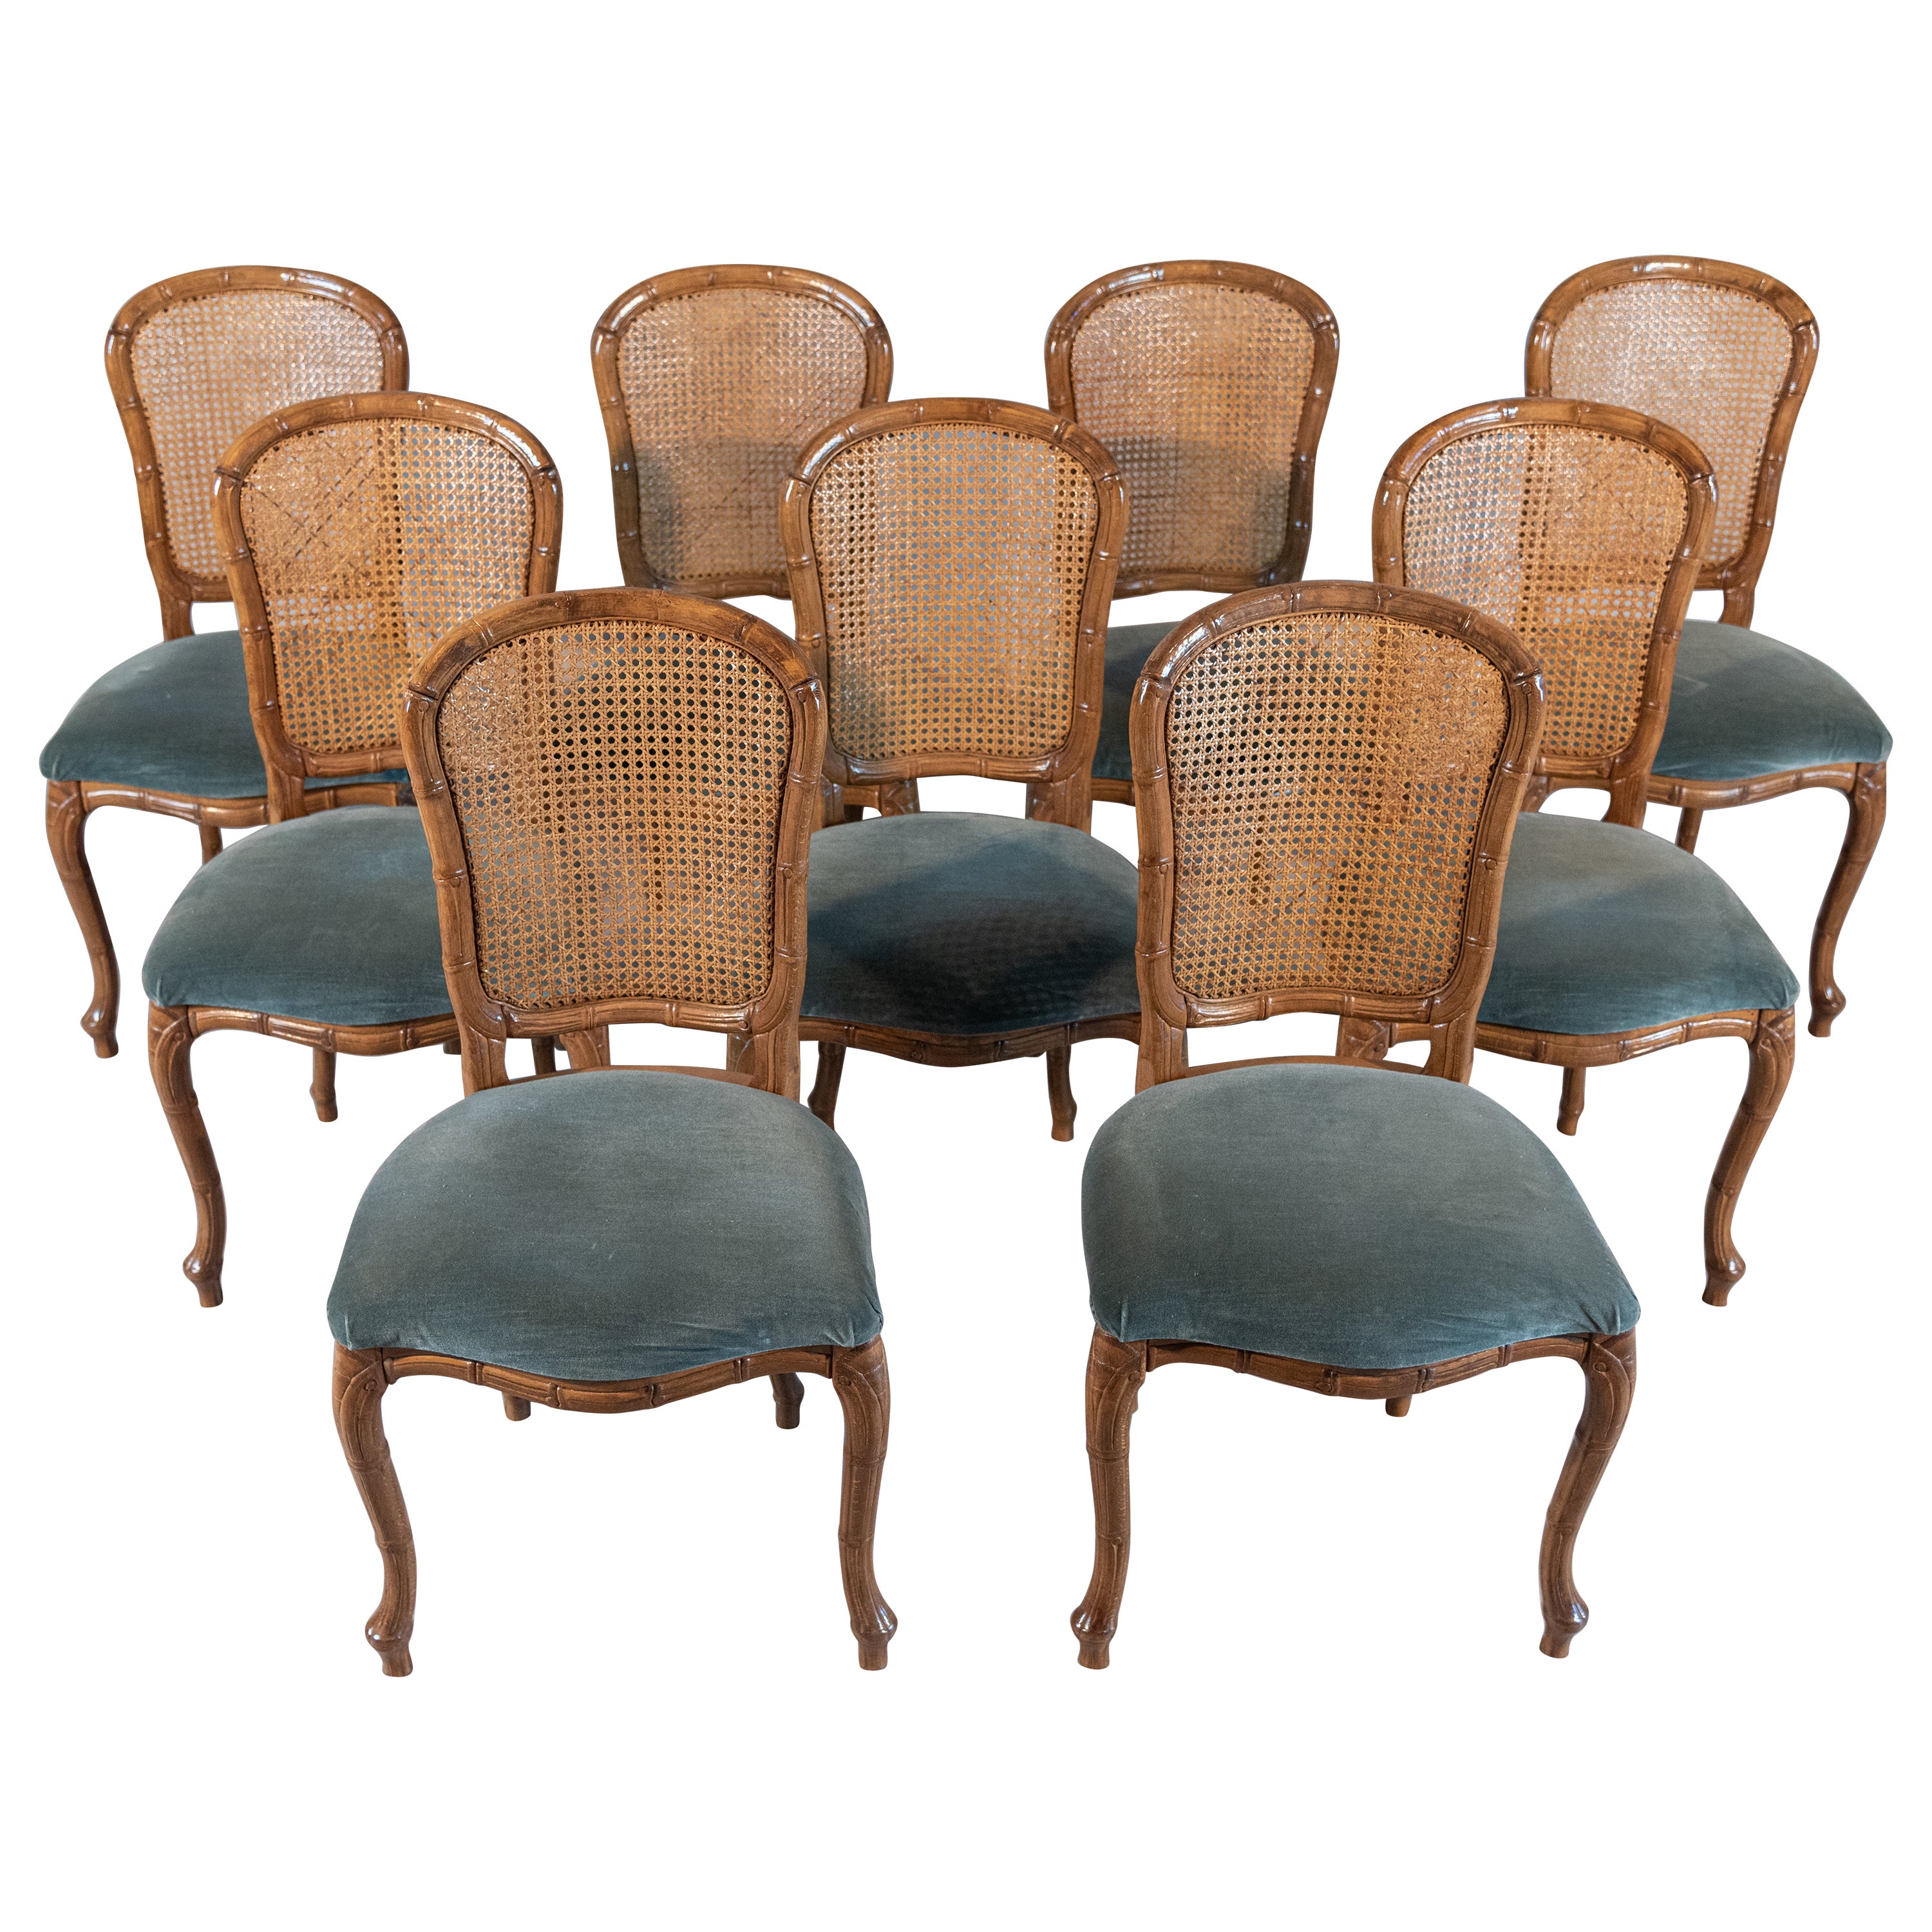 Set of Ten Midcentury Caned Chairs